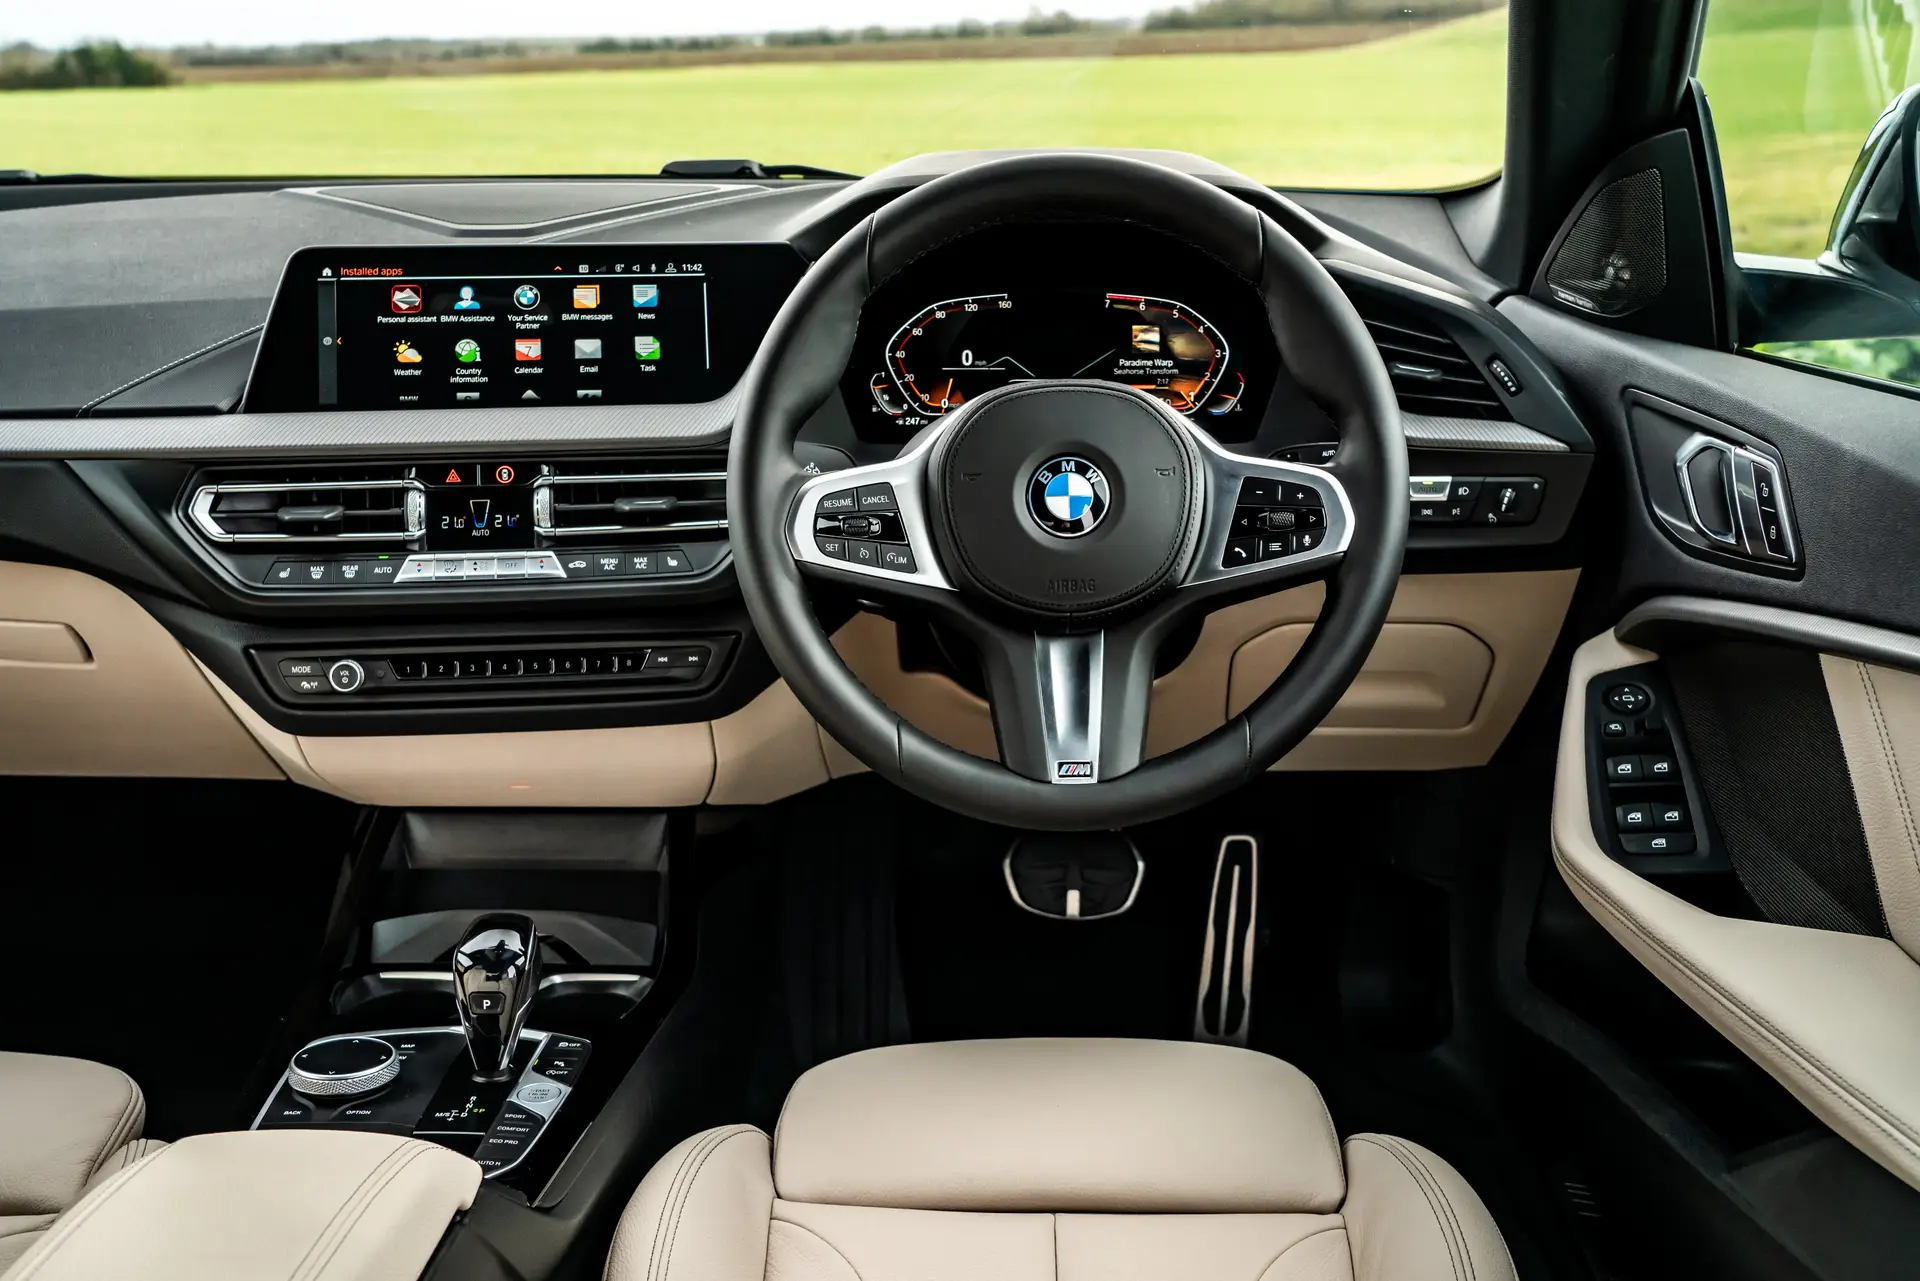 BMW 2 Series Gran Coupe Review: Interior